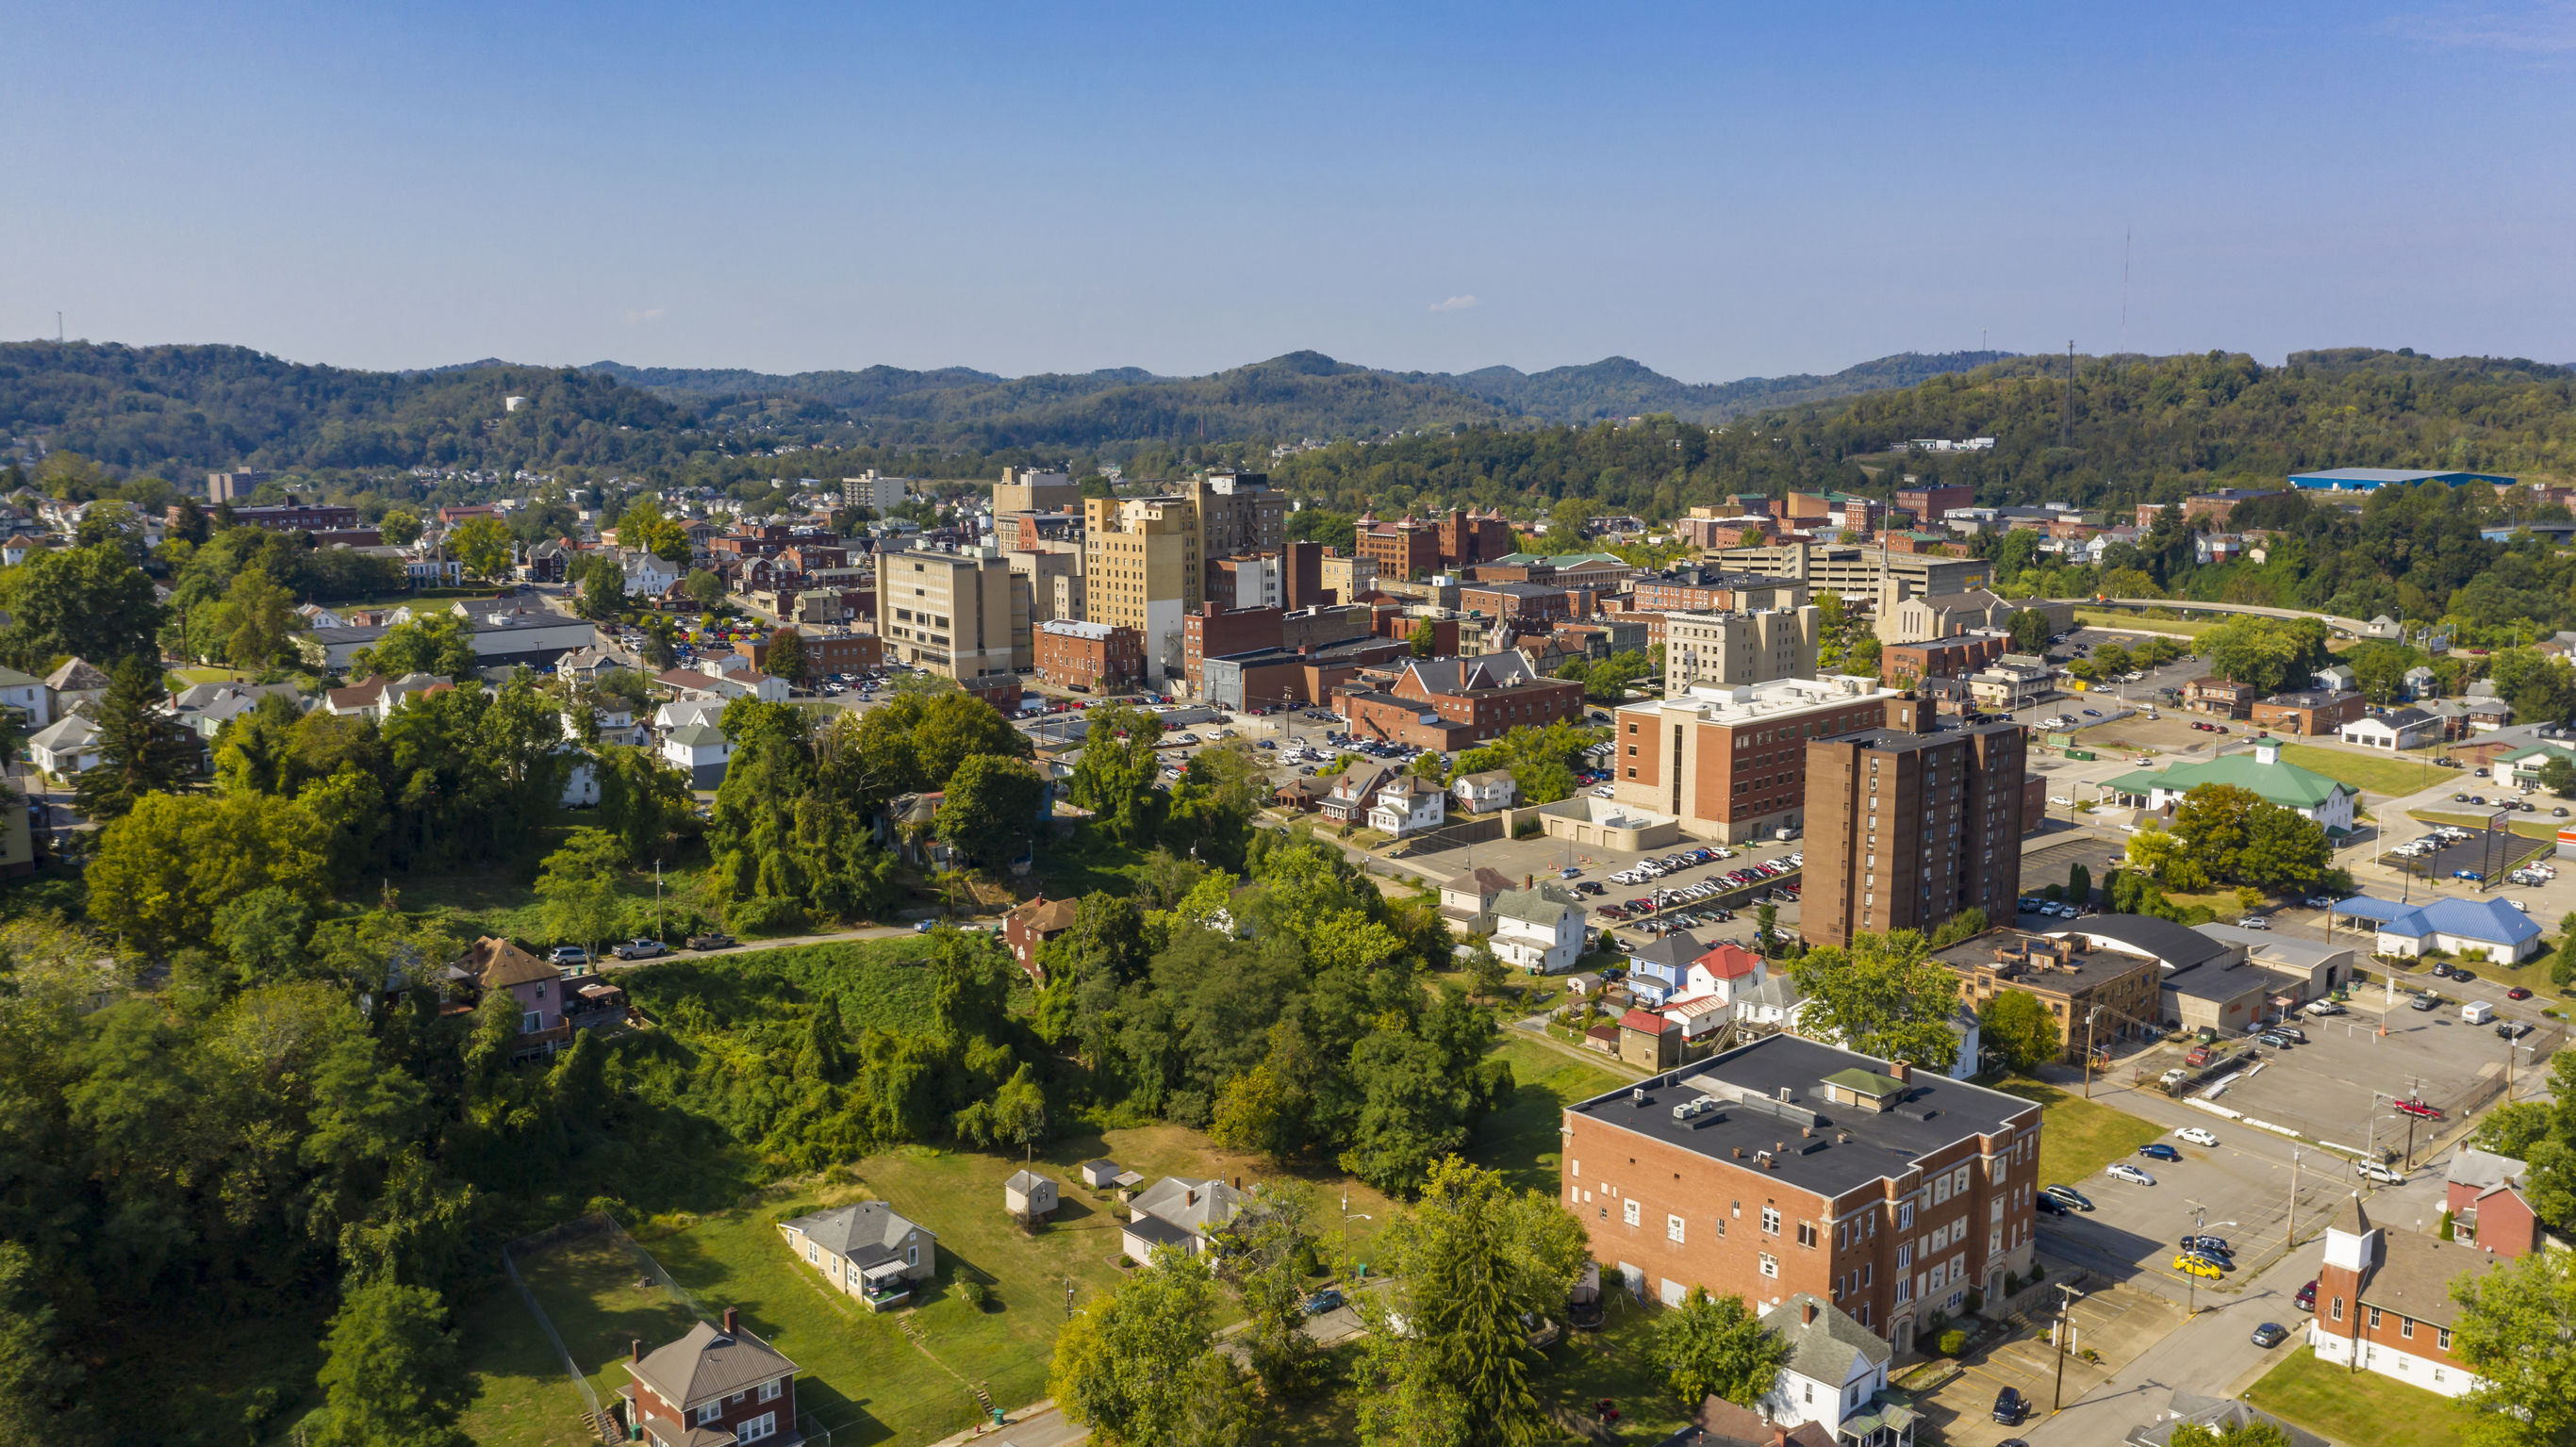 	Image of downtown Clarksburg, WV, representing how WV commercial real estate attorney Allison J. Farrell of Jenkins Fenstermaker, PLLC helps protect your interests throughout commercial real estate transactions.